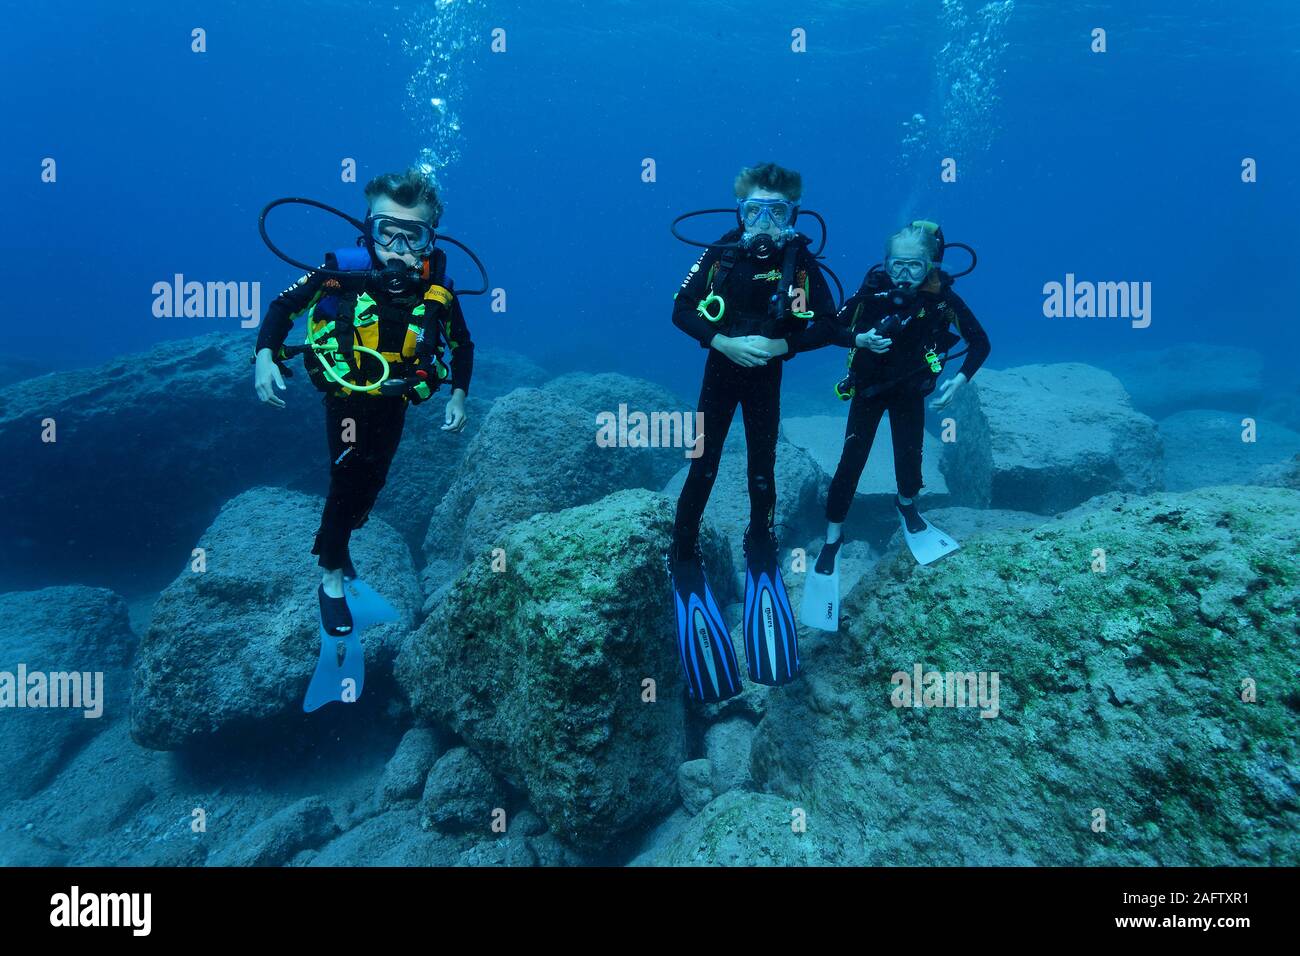 Children discover scuba diving at a rocky reef, Zakynthos island, Greece Stock Photo